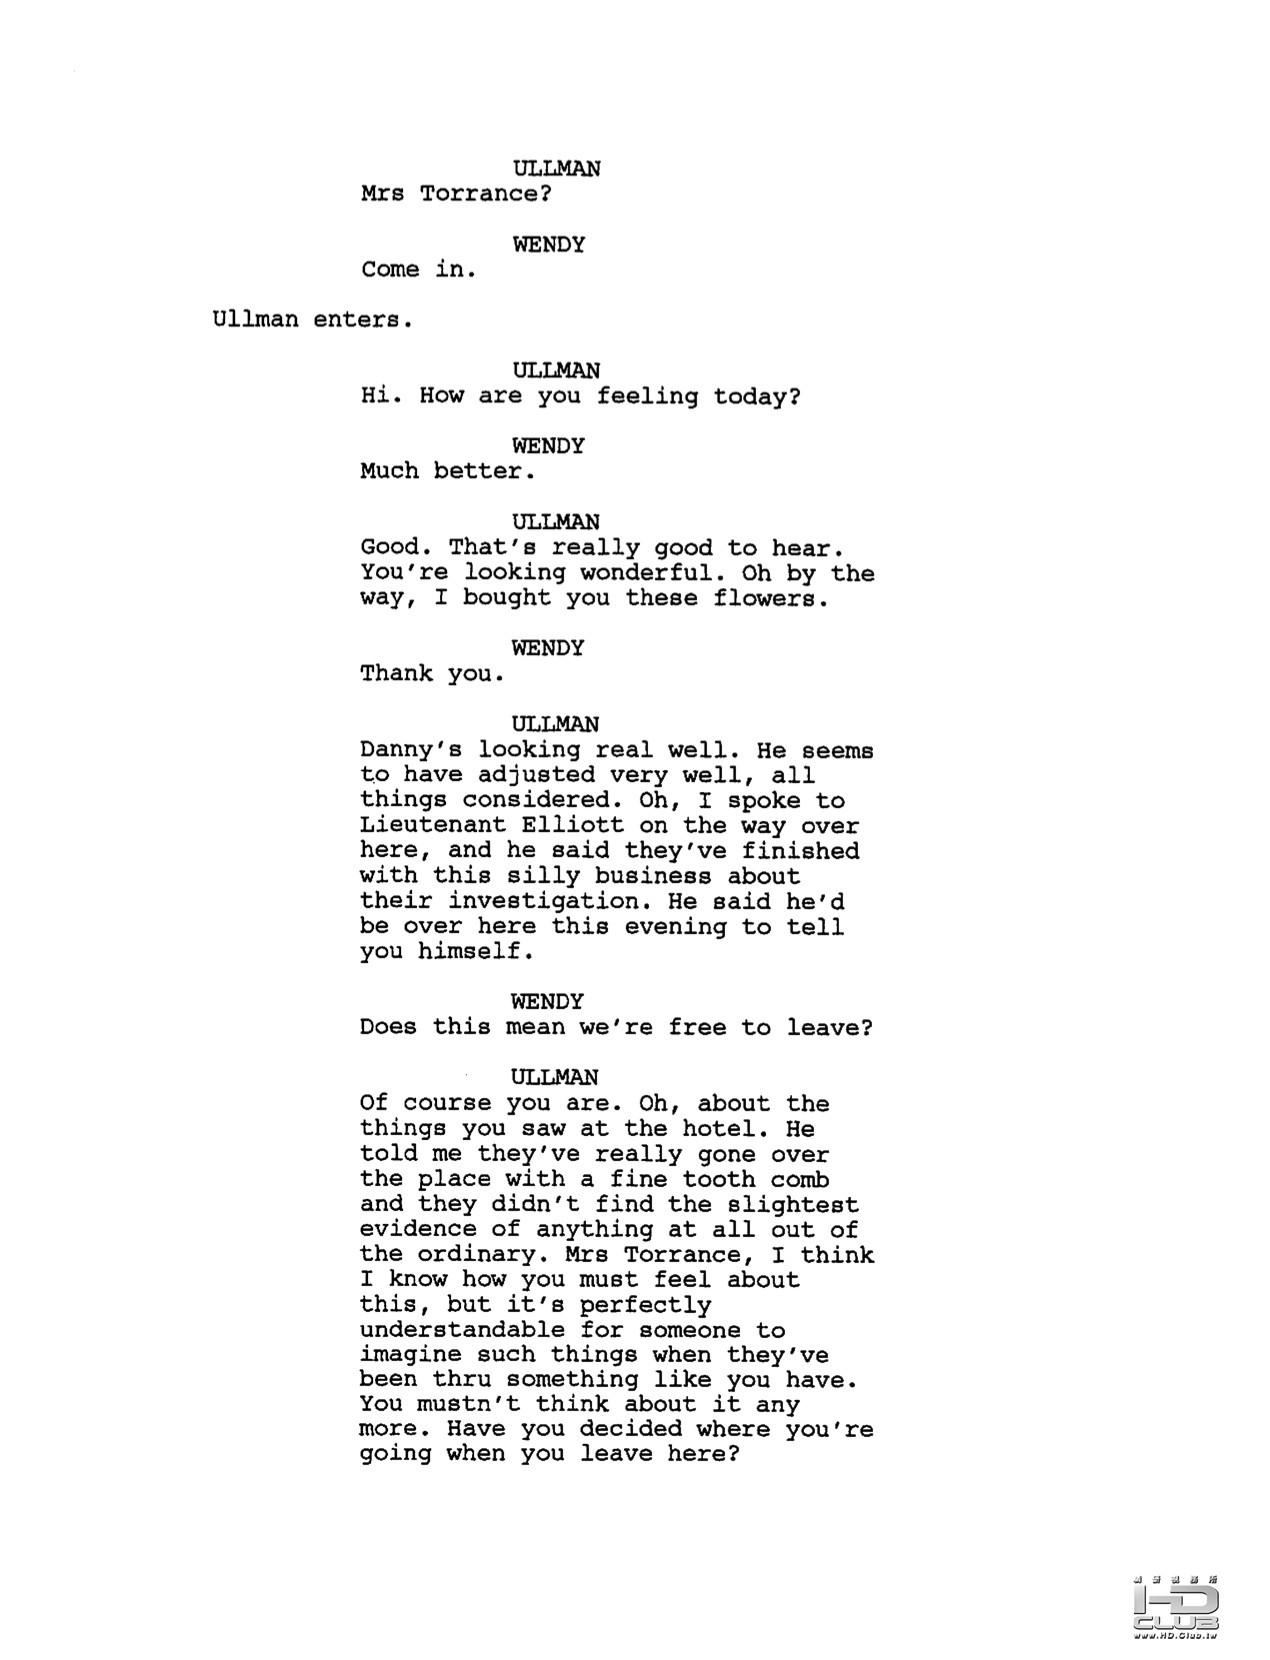 screenplay-for-the-deleted-original-ending-of-the-1.jpeg